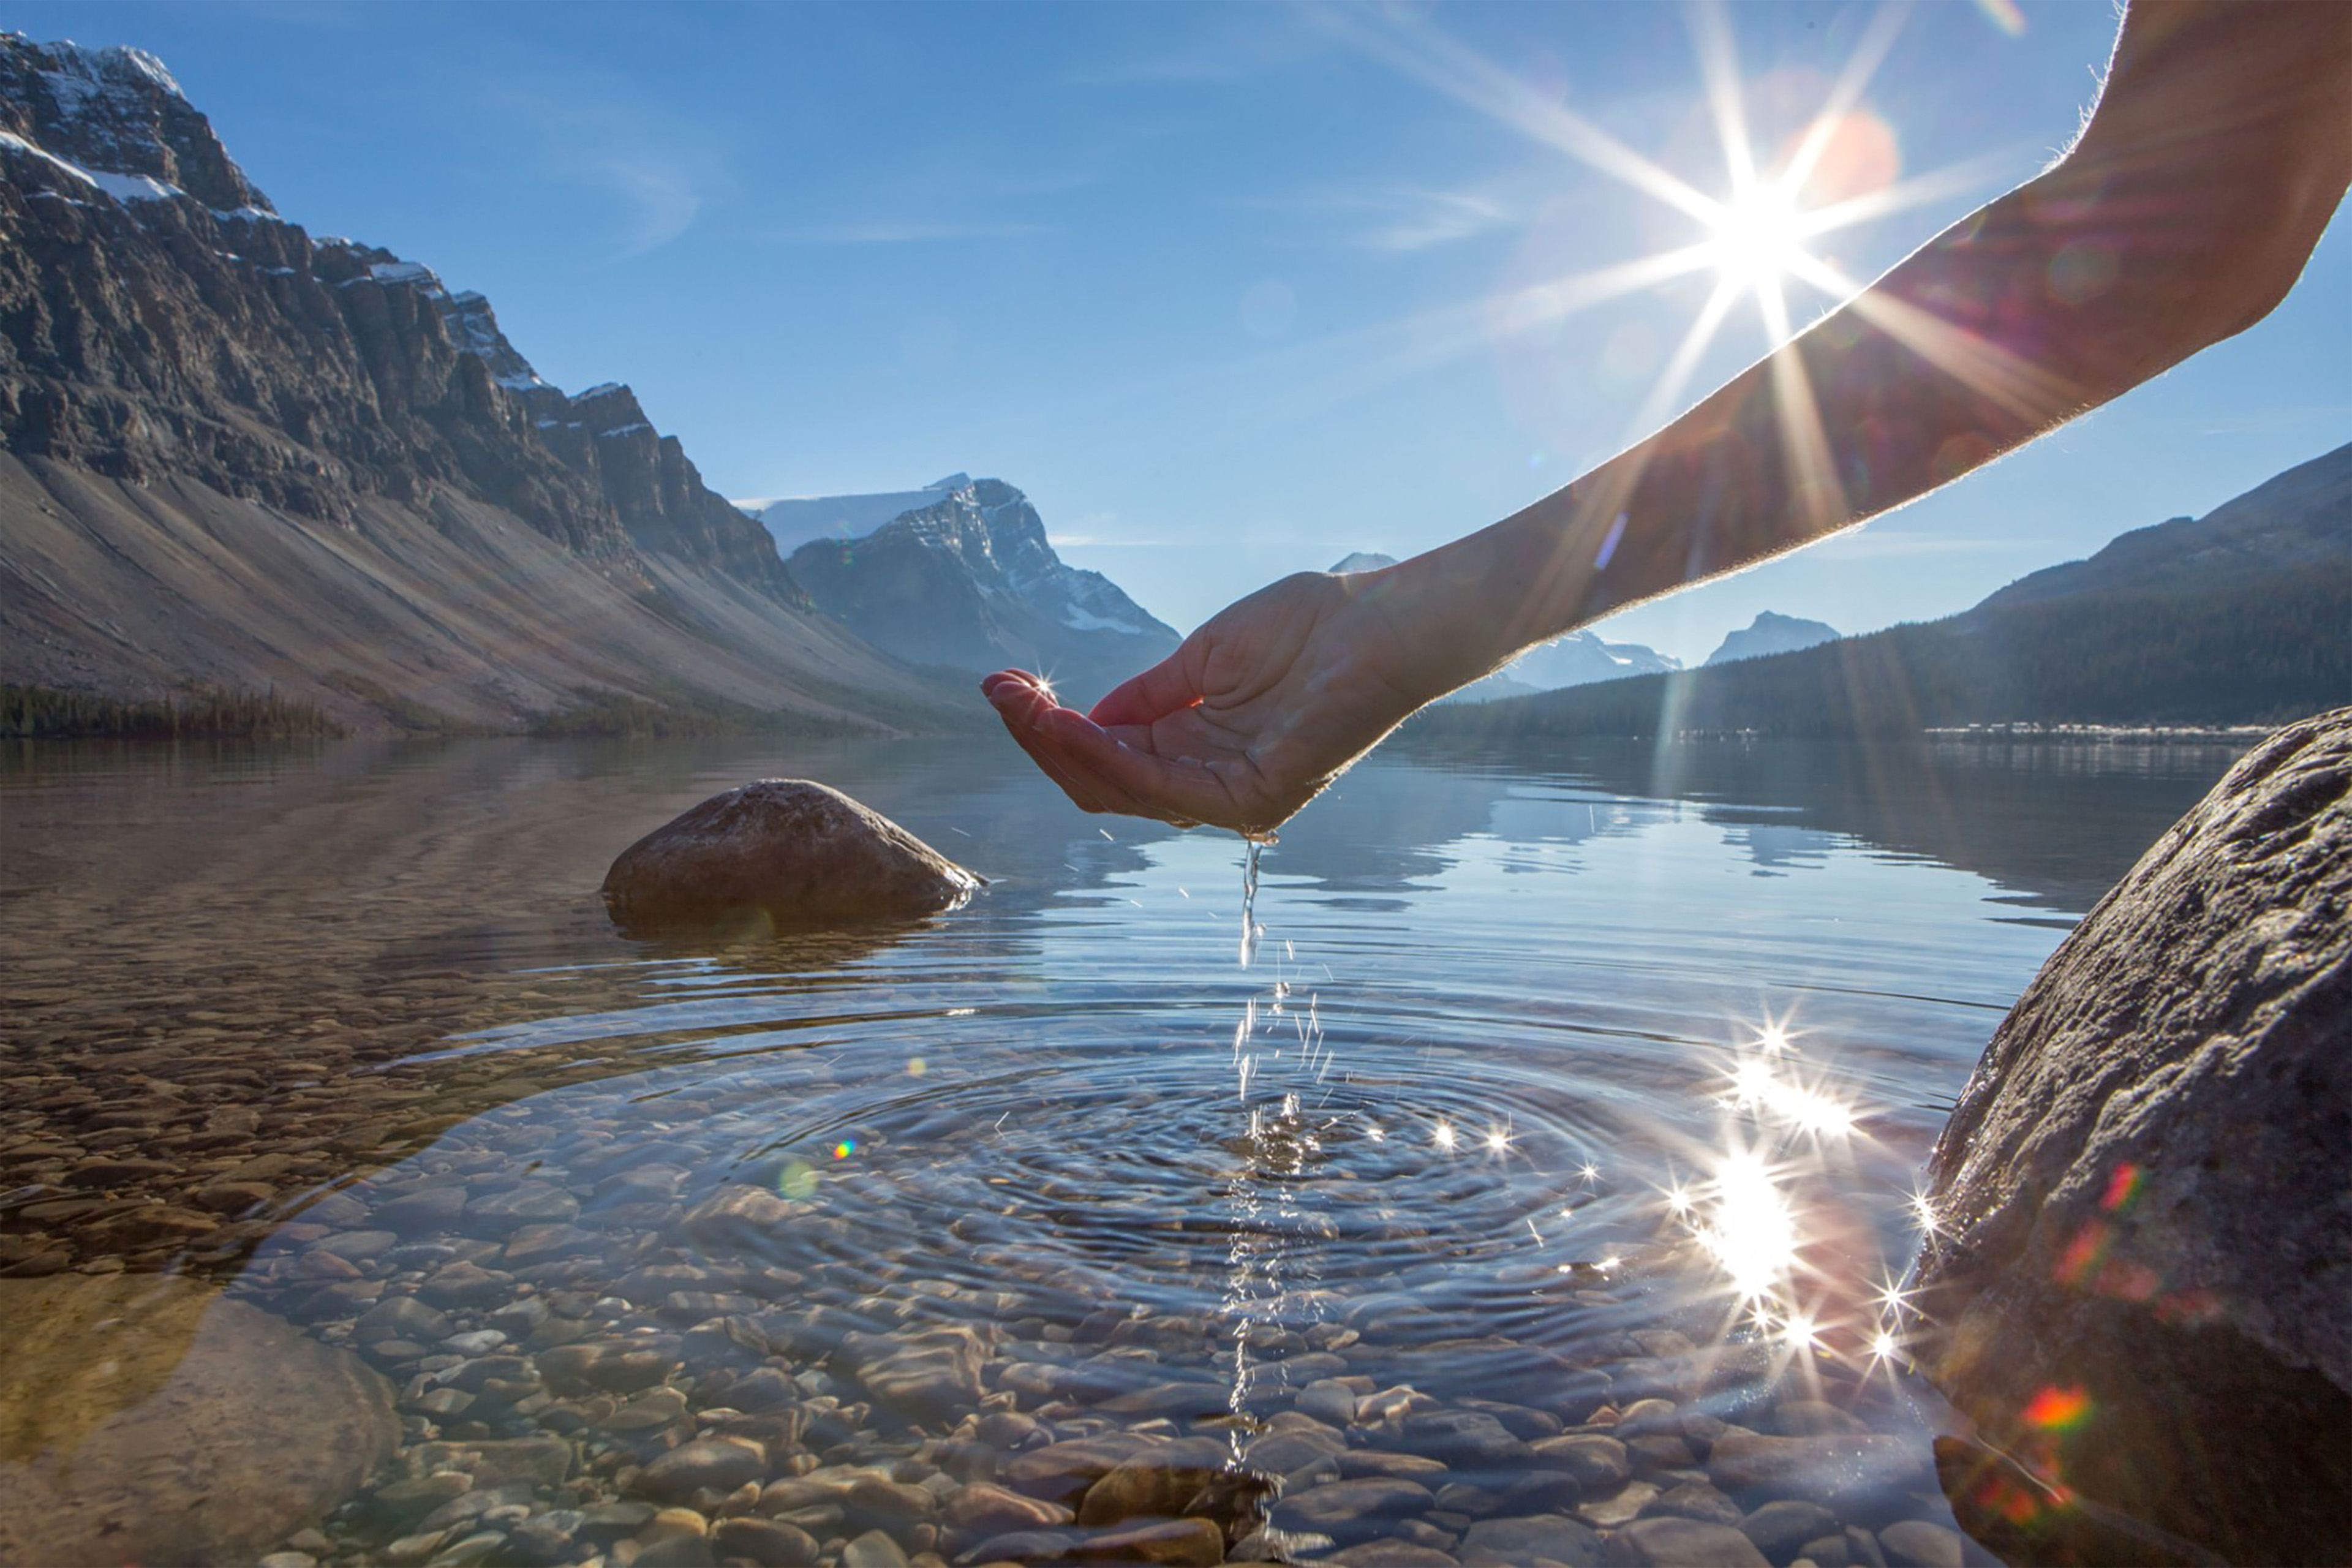 Human hand cupped to catch the fresh water from lake background